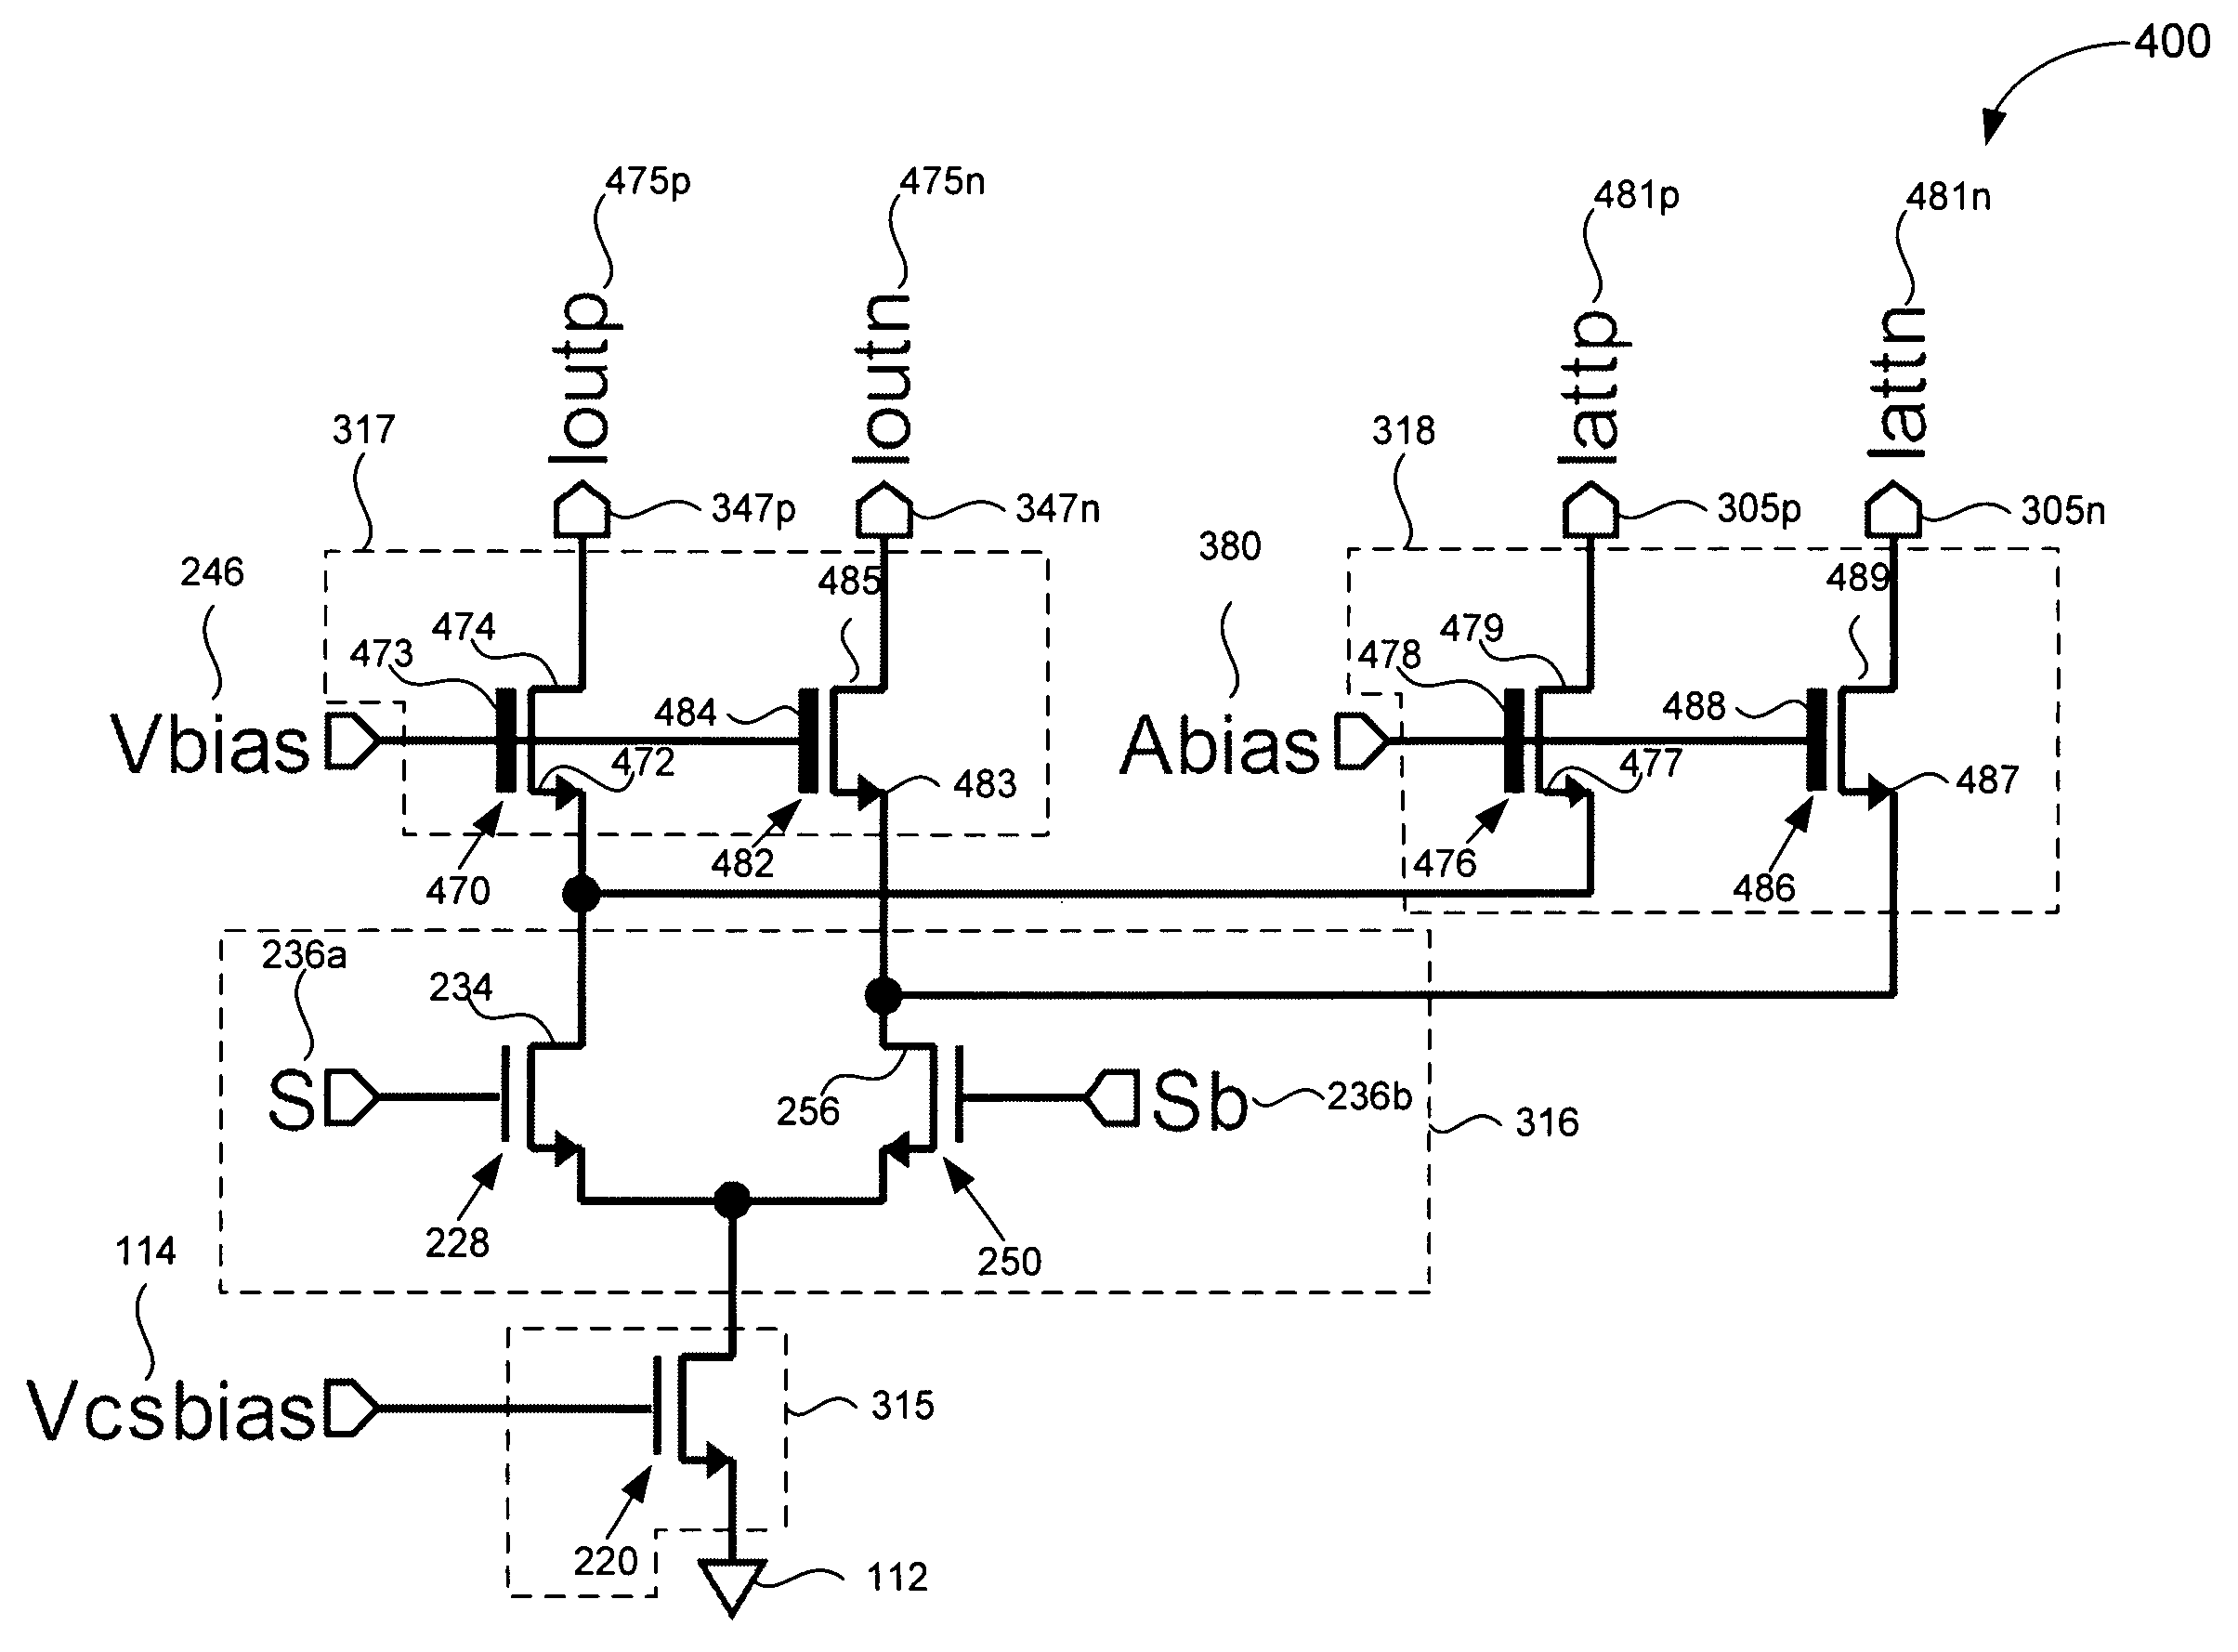 Digital-to-analog converter with programmable current control